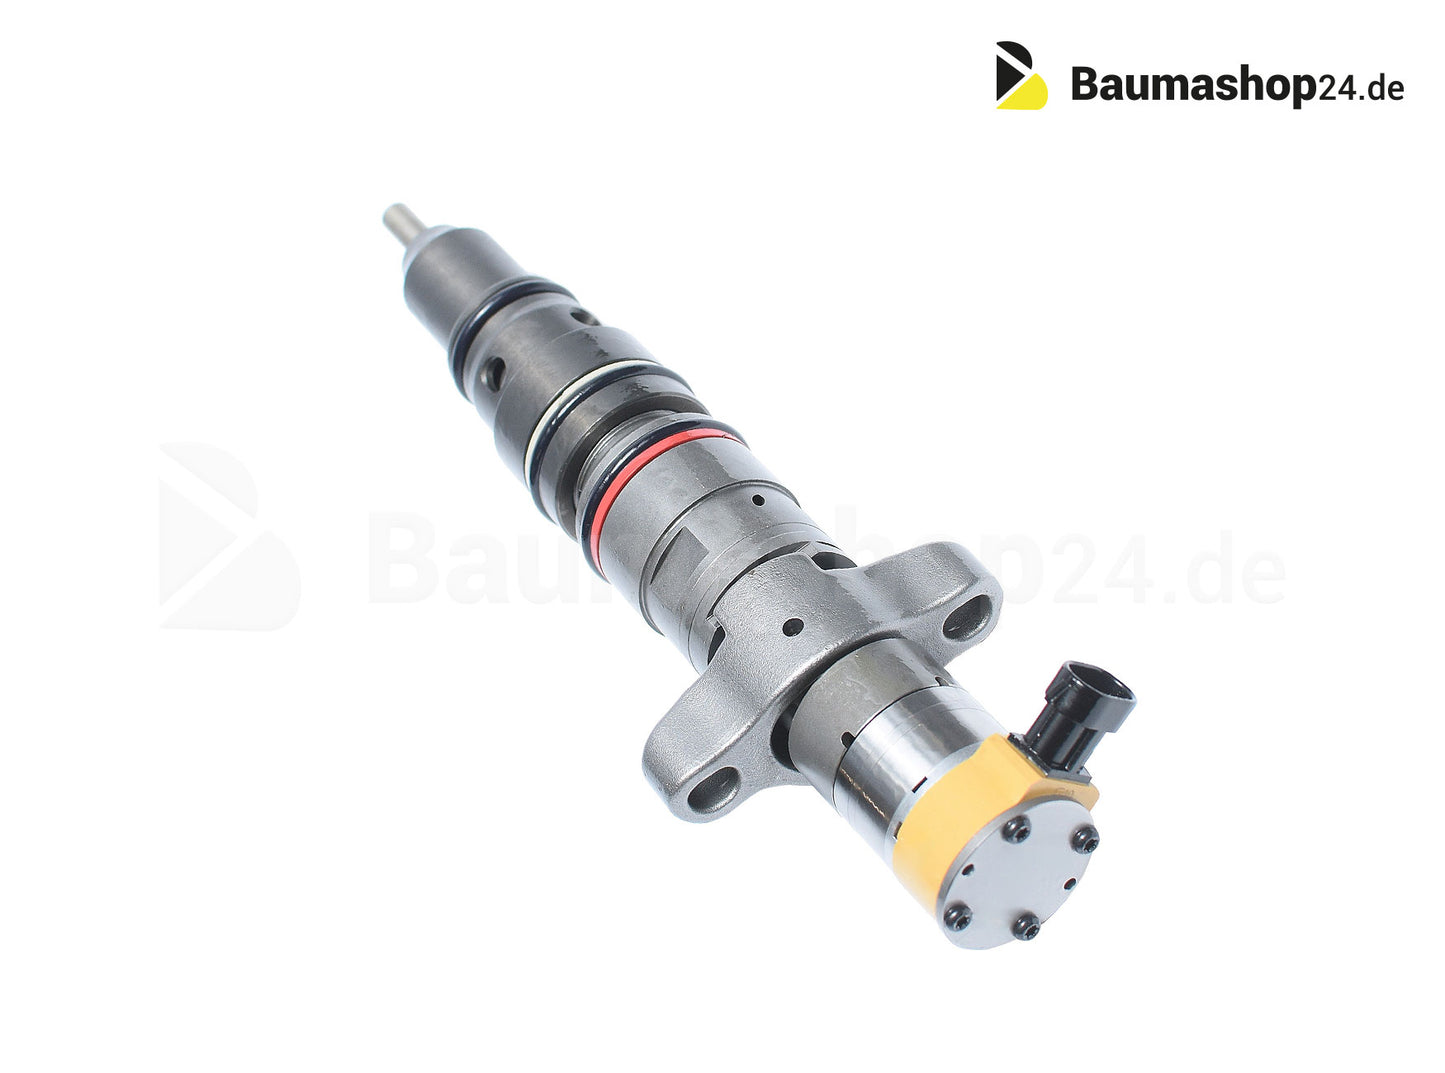 Caterpillar fuel injector / injector 321-3600 for 924H / 924HZ